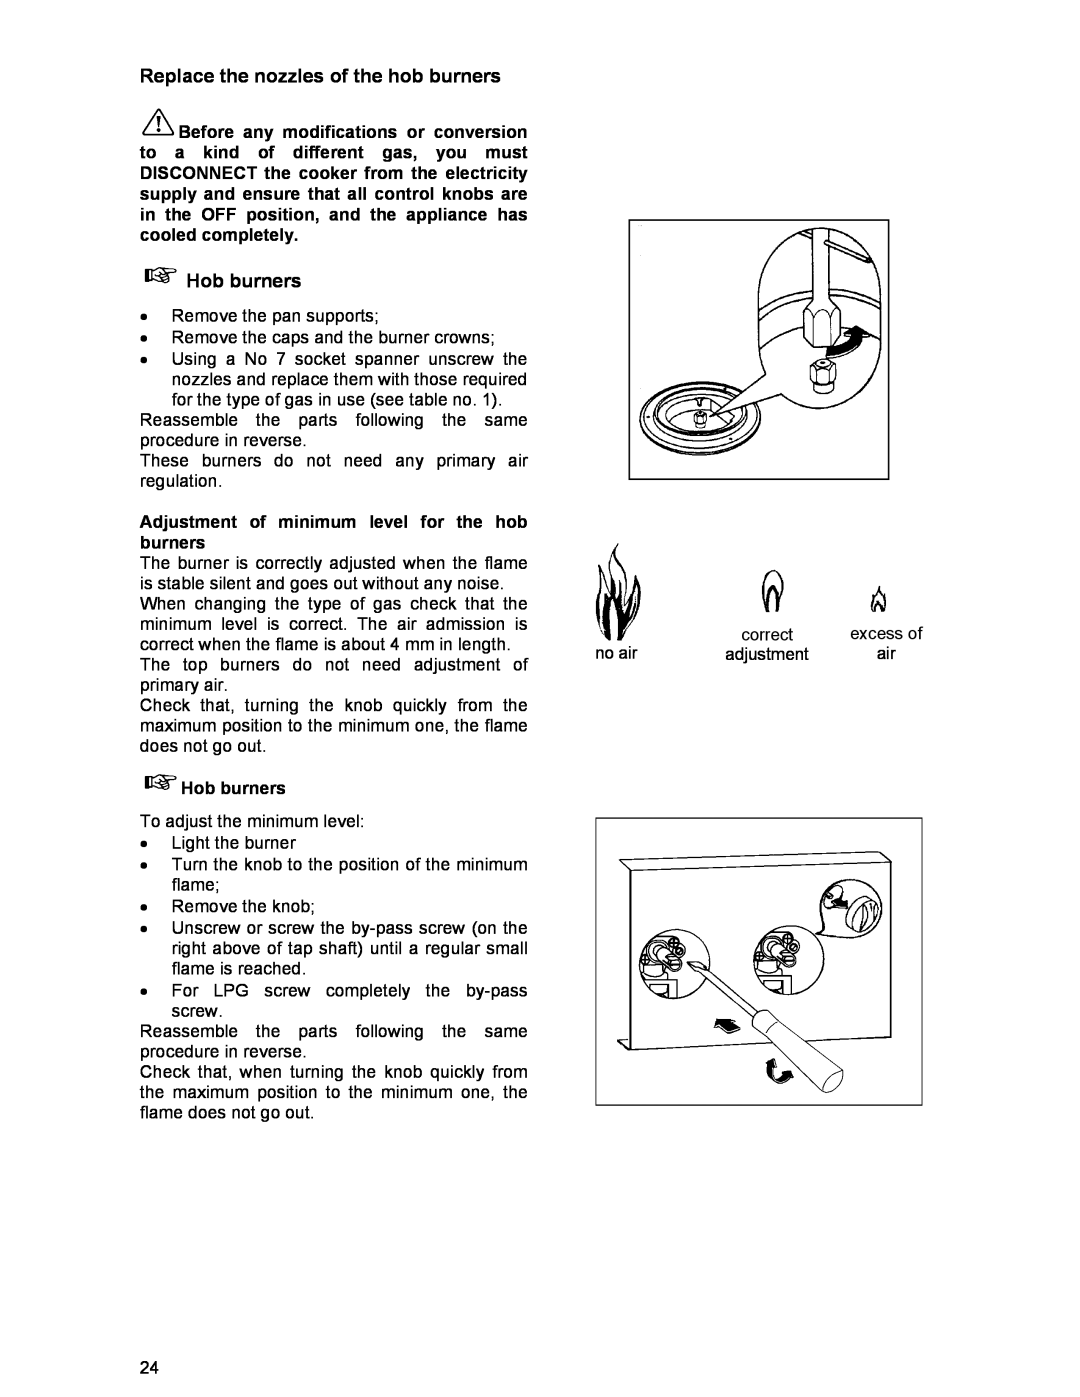 Electrolux SIG 233 manual Replace the nozzles of the hob burners, Hob burners, Adjustment of minimum level for the hob 